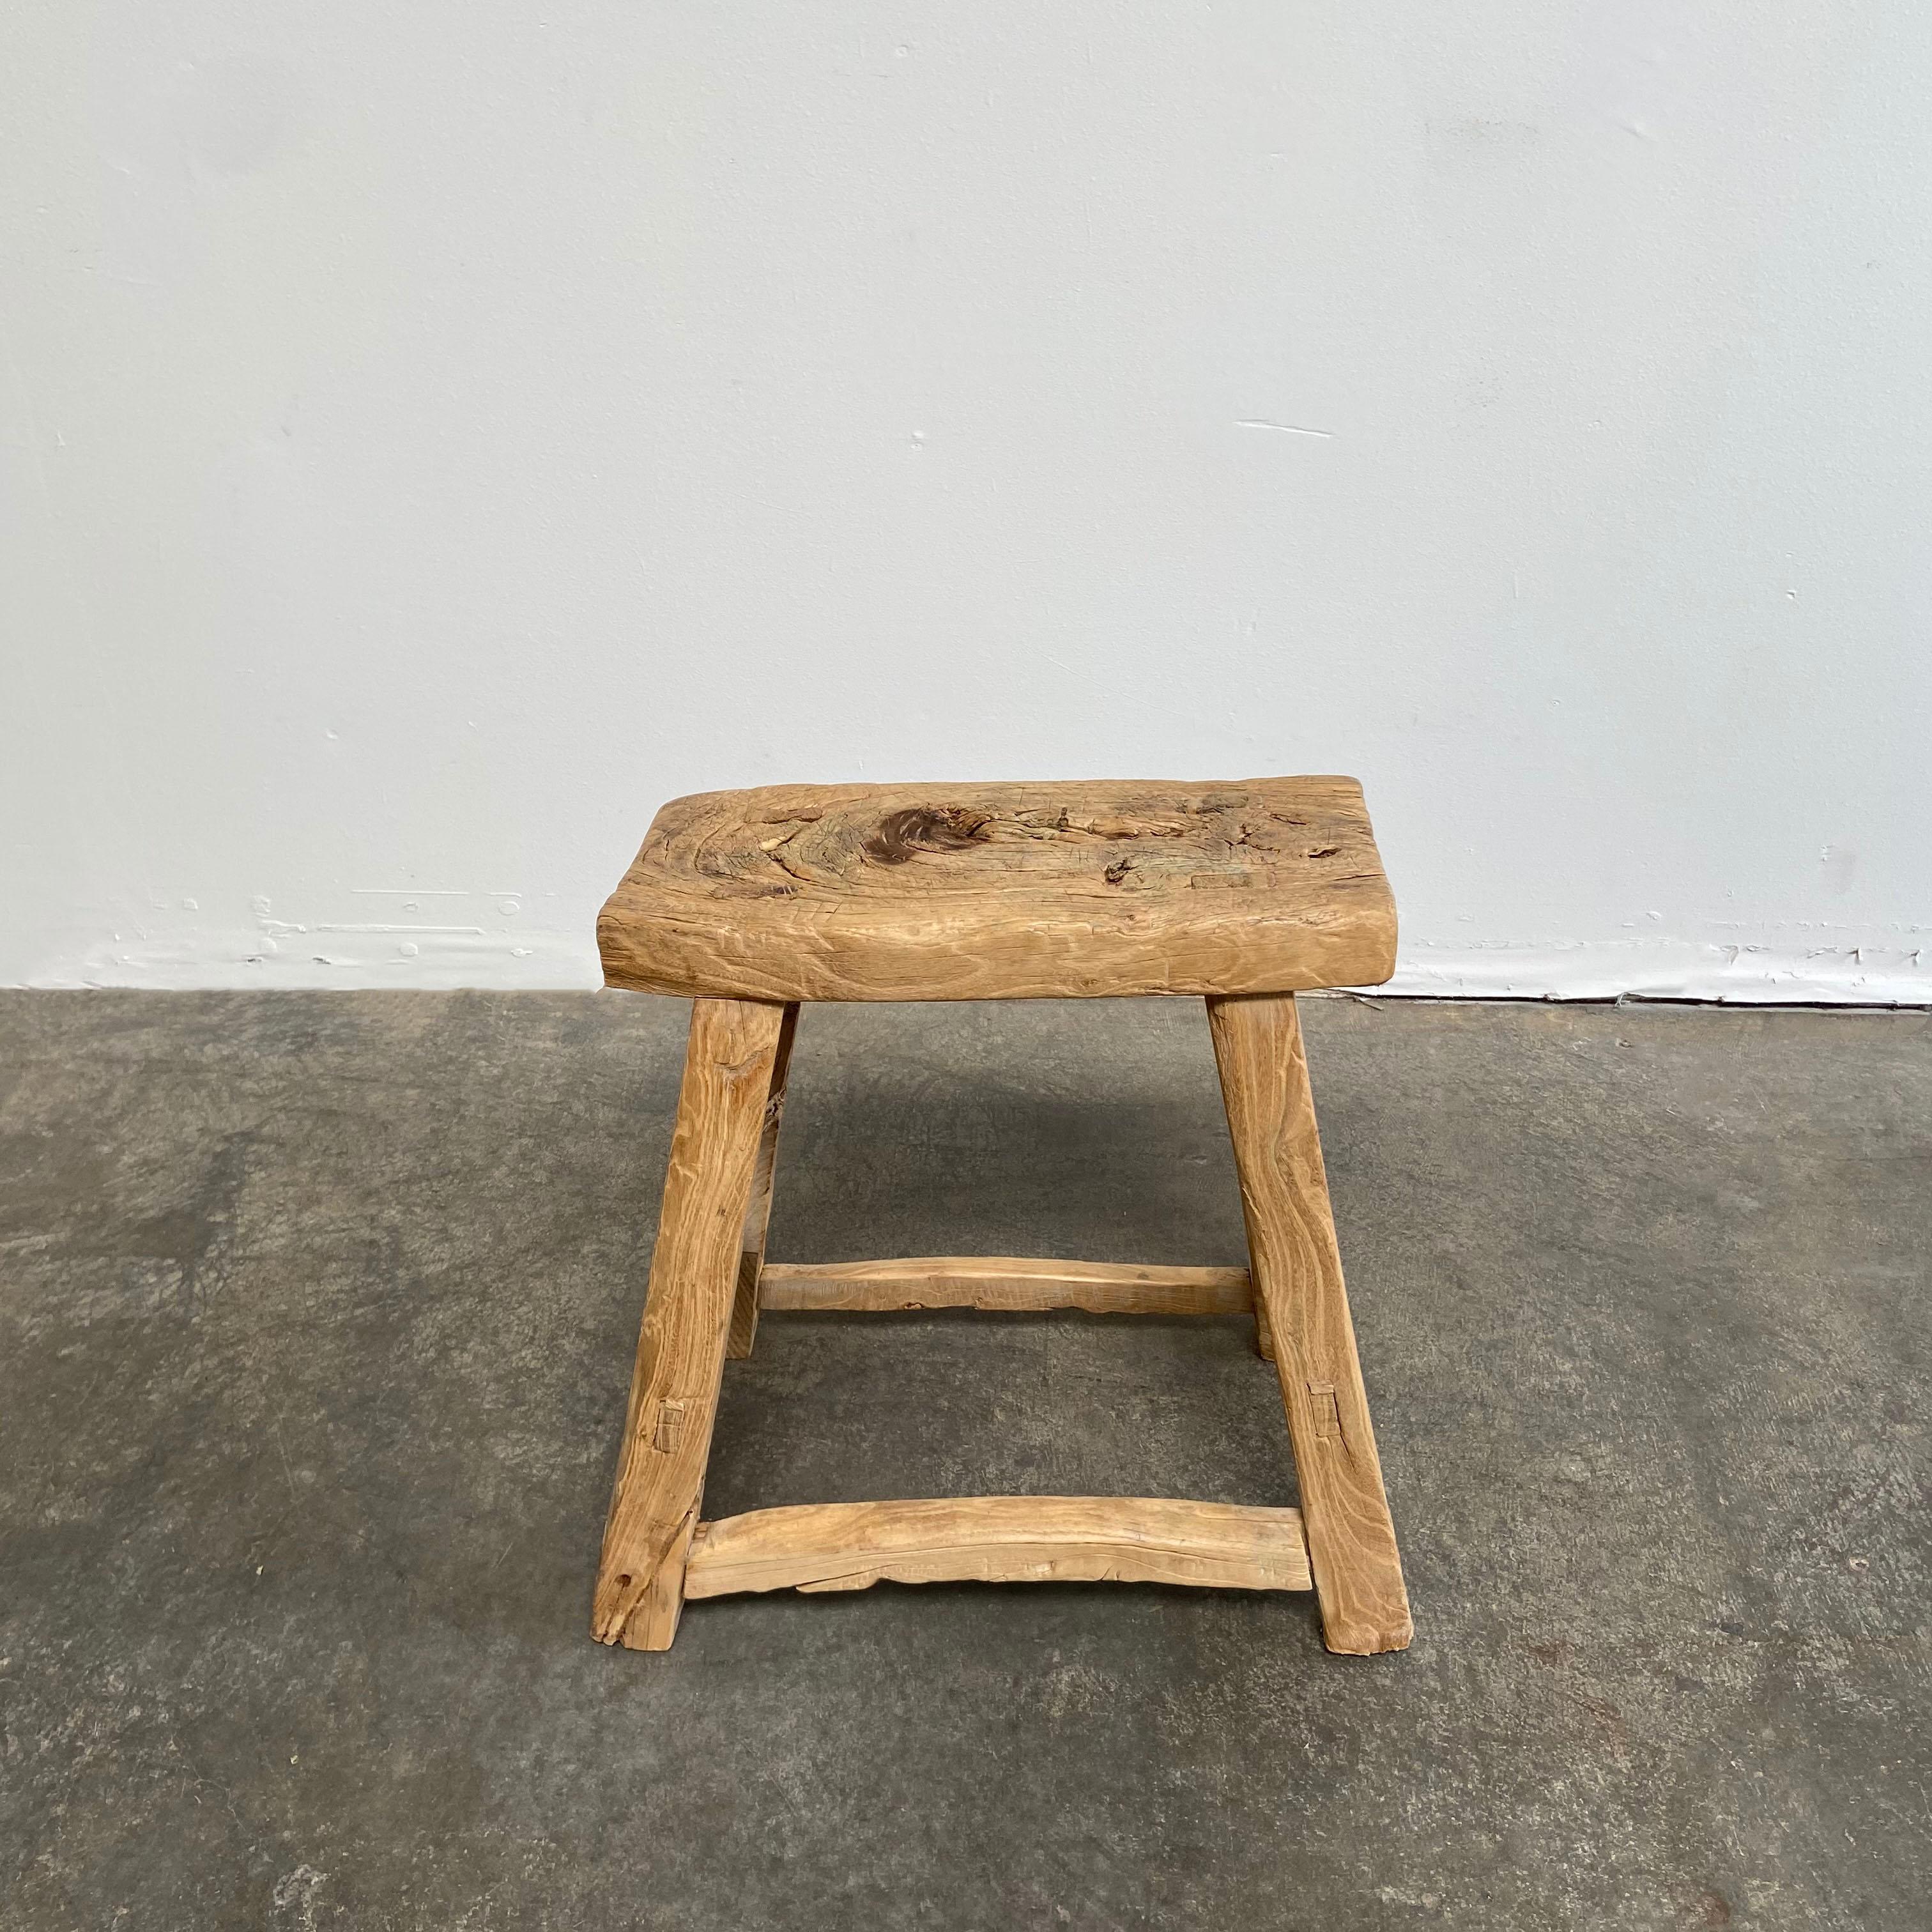 Vintage antique elm wood stool
These are the real vintage antique elm wood stools! Beautiful antique patina, with weathering and age, these are solid and sturdy ready for daily use, use as a table, stool, drink table, they are great for any space.